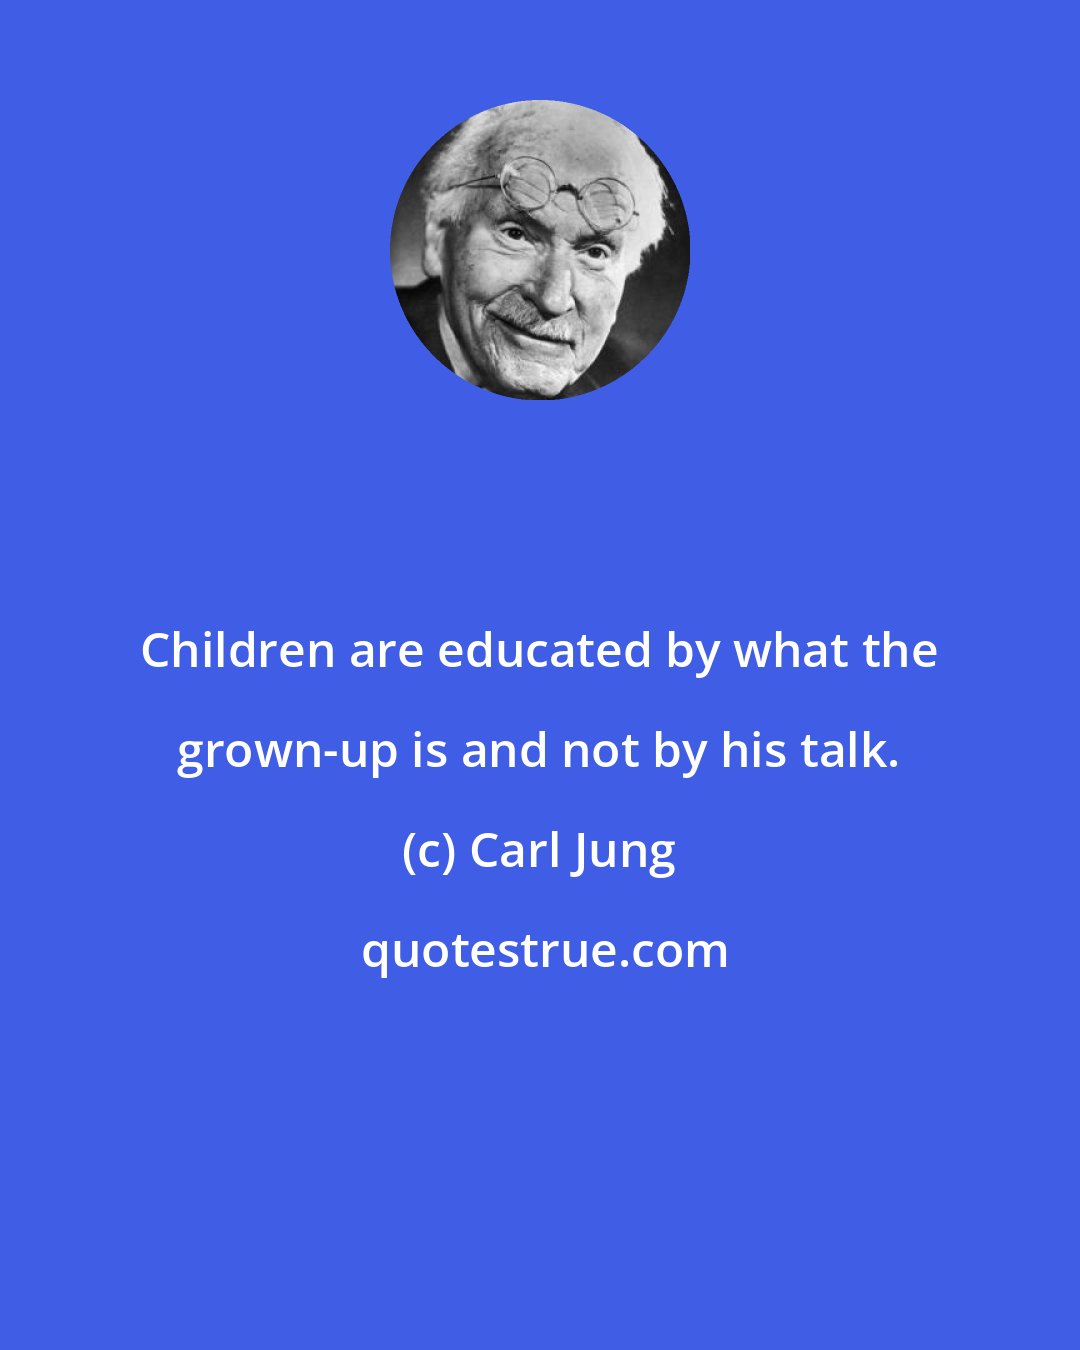 Carl Jung: Children are educated by what the grown-up is and not by his talk.